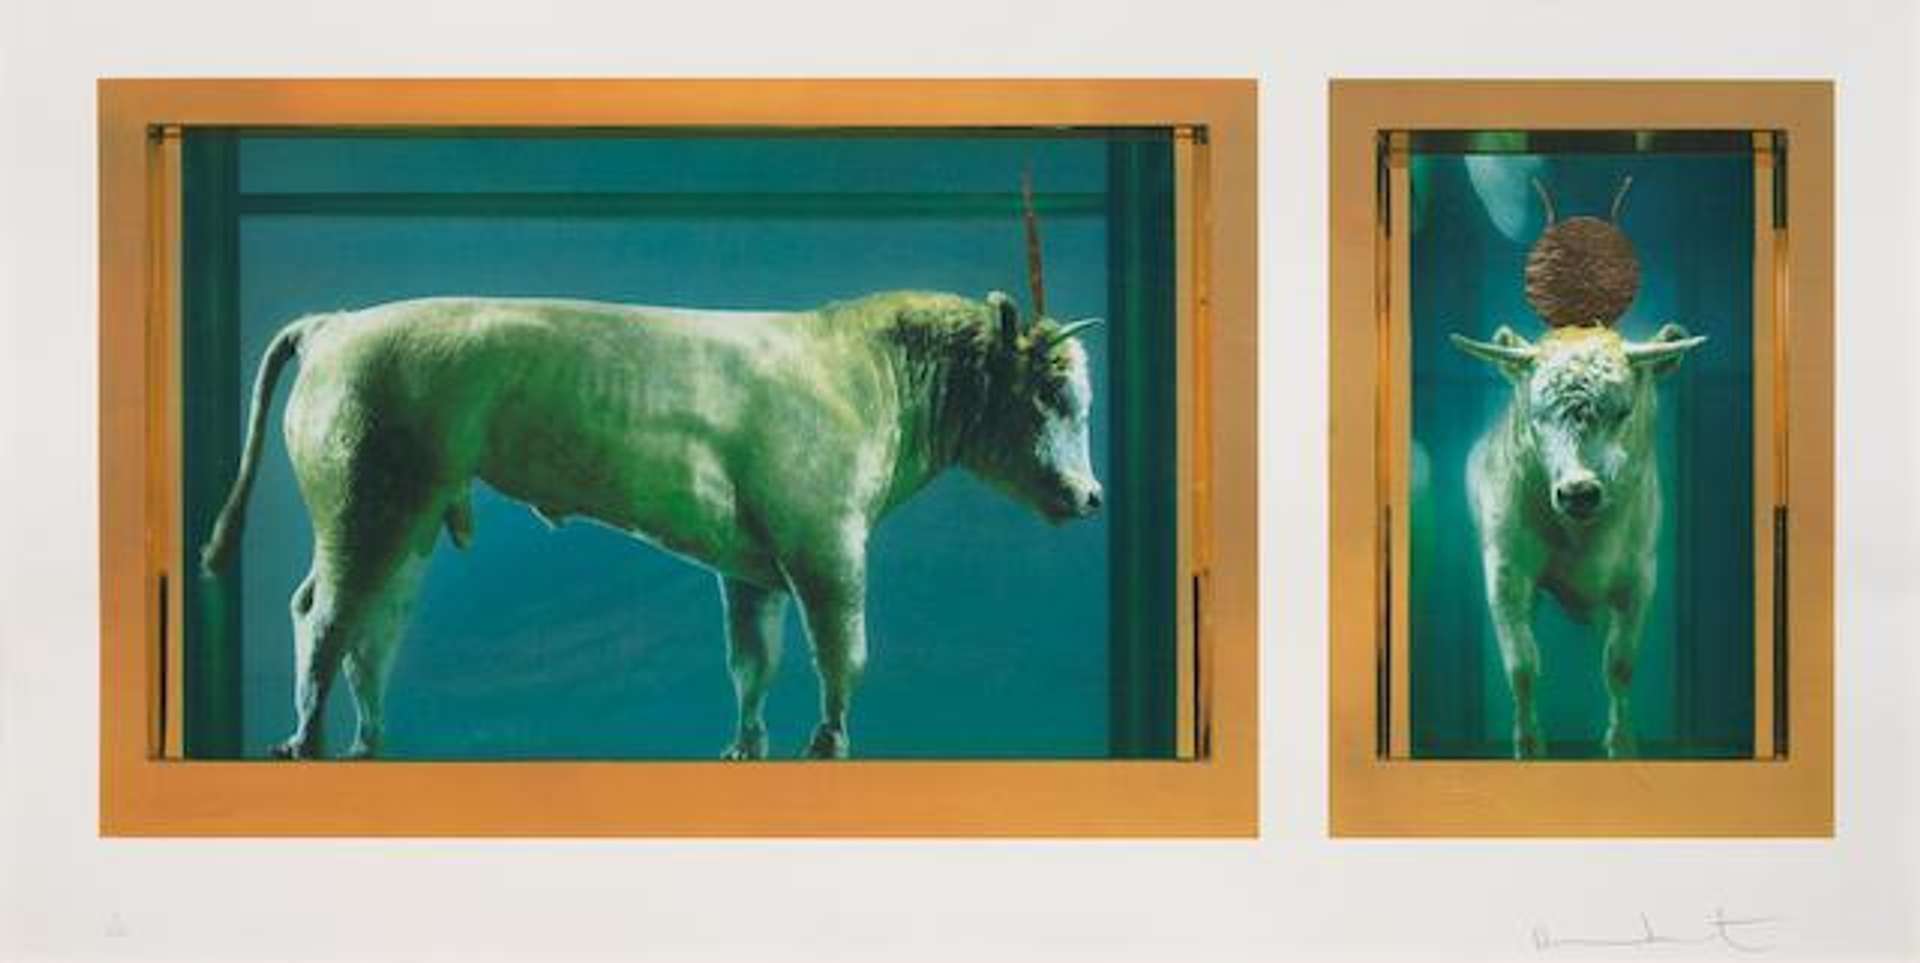 Damien Hirst: The Golden Calf - Signed Print